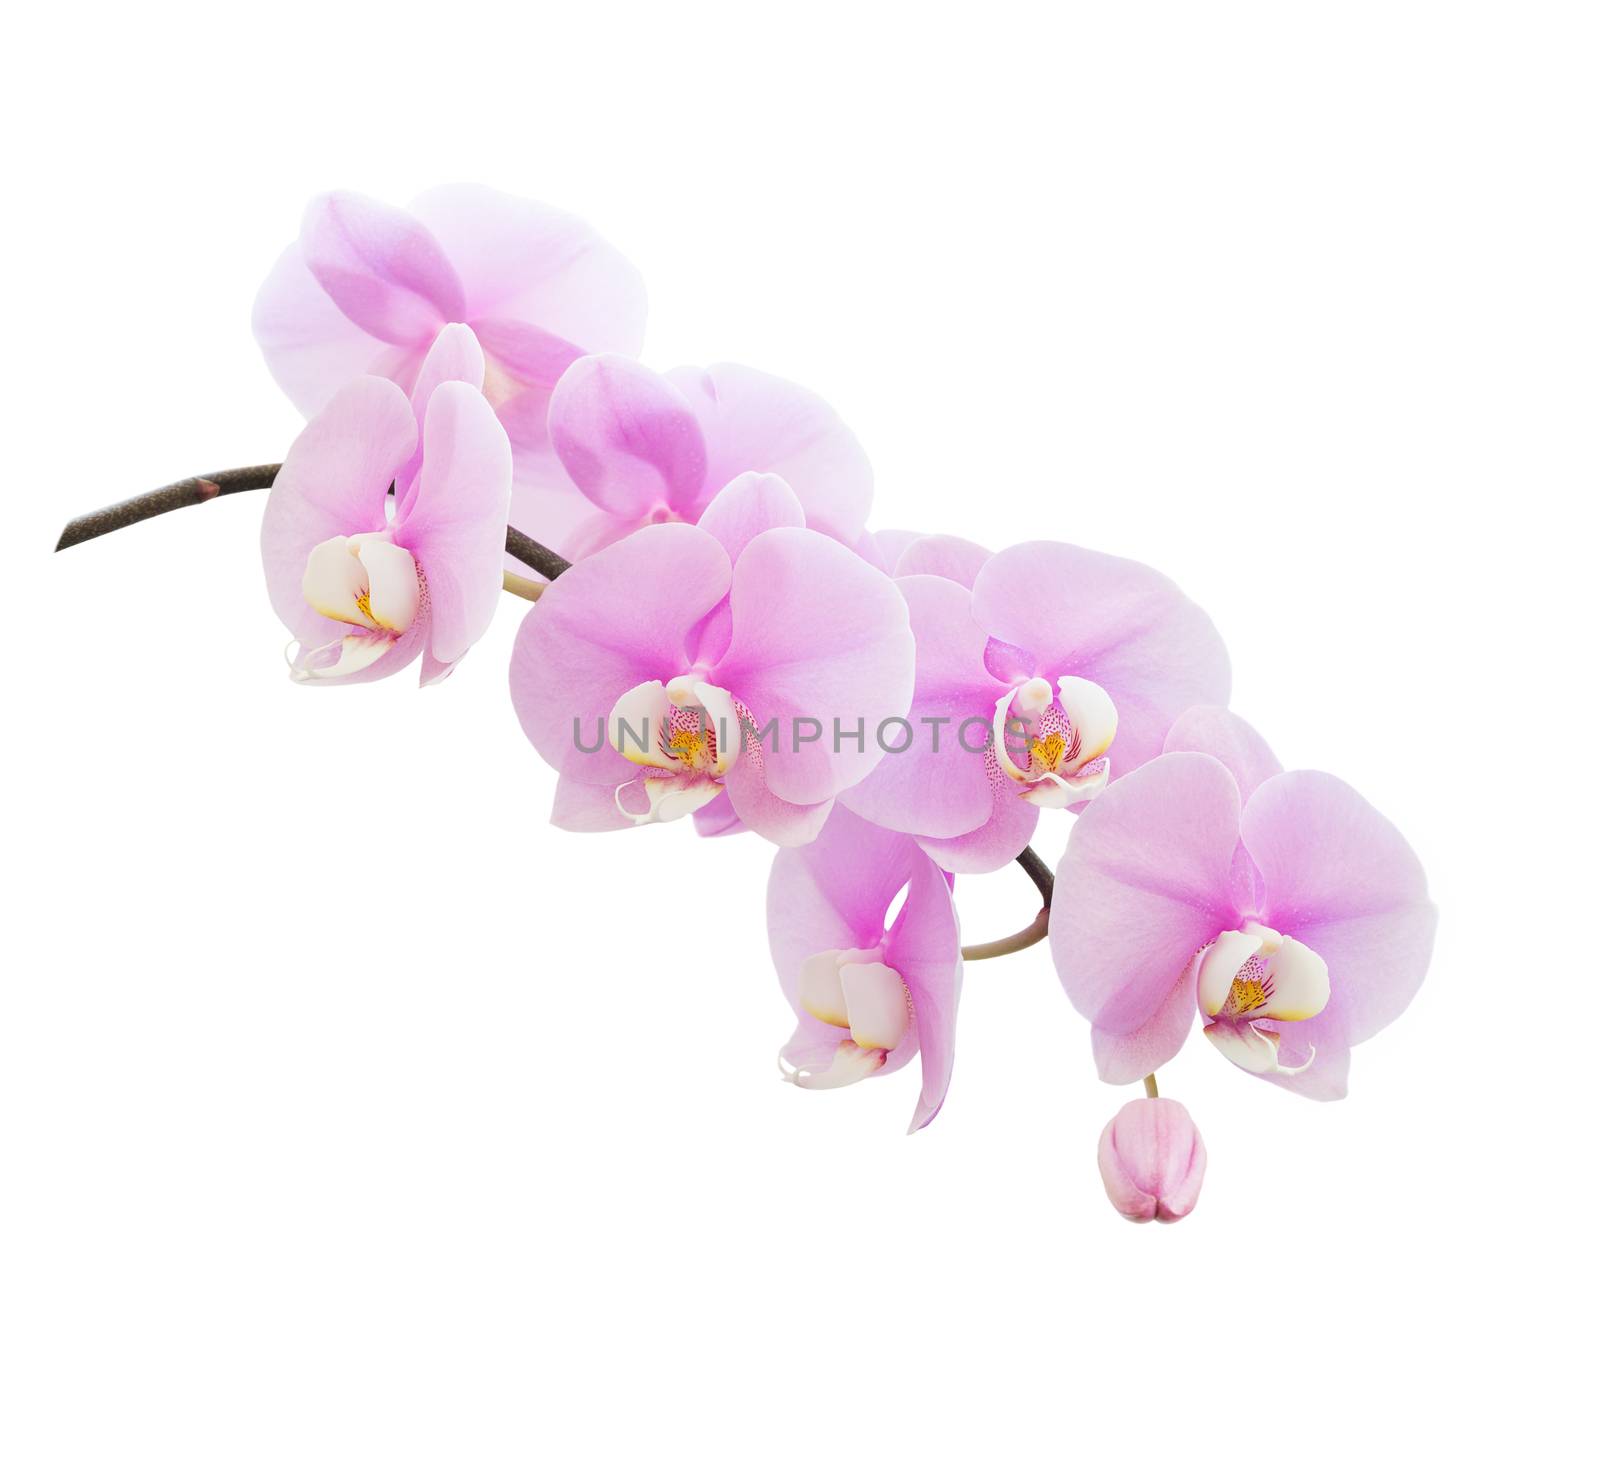 Pale pink orchid flowers varieties Aphrodite isolated on a white background